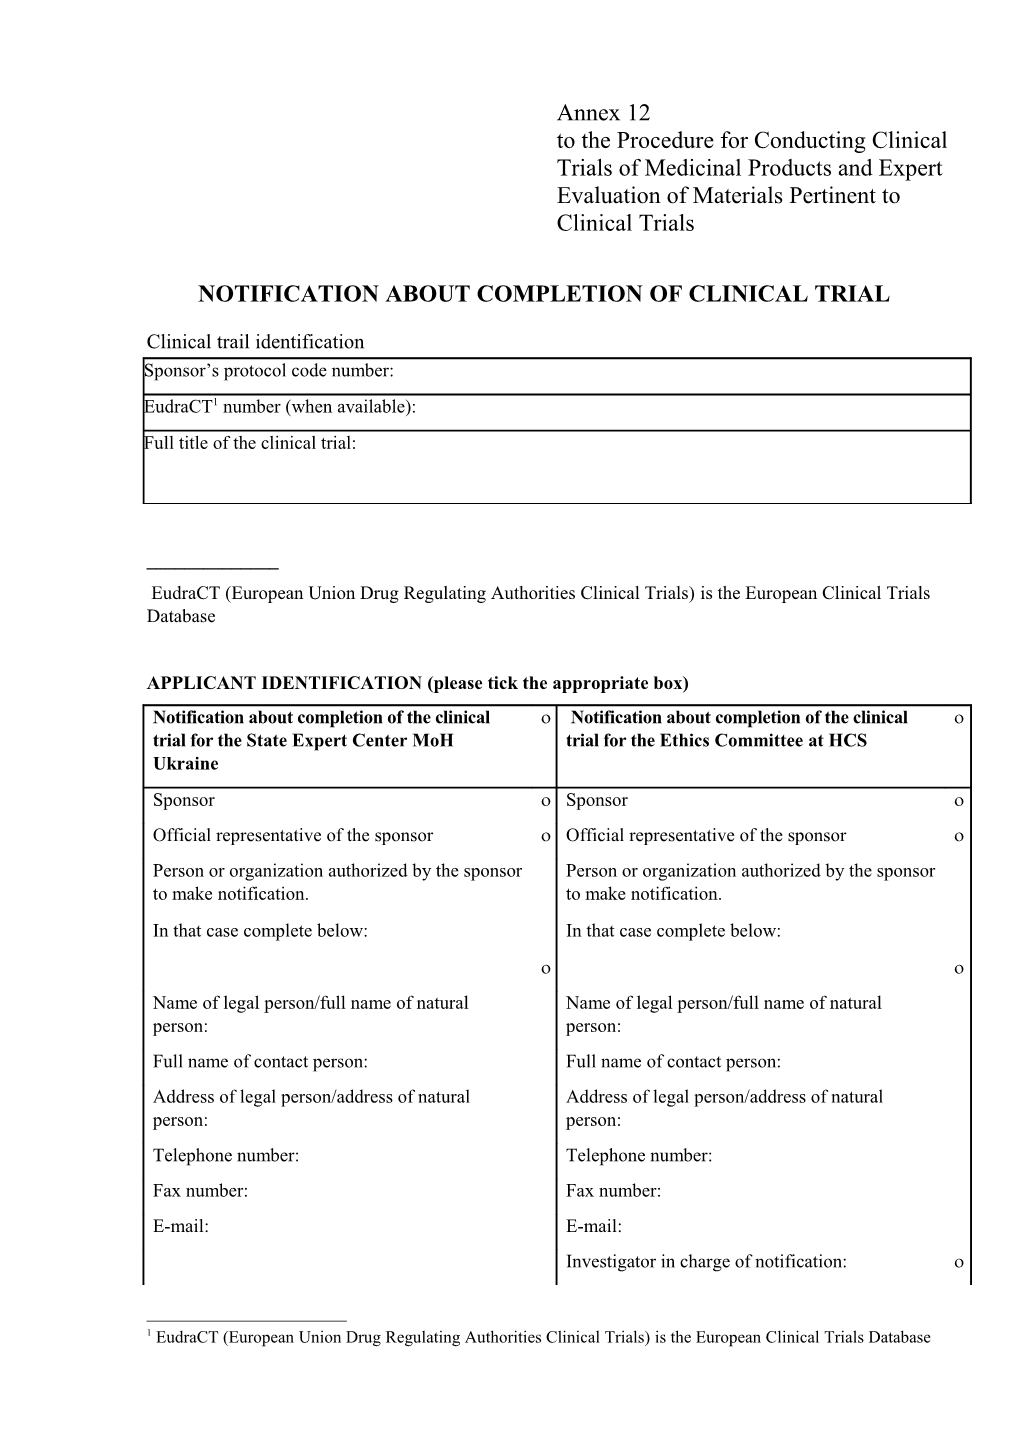 Annex 12 - End of Trial Notification Form